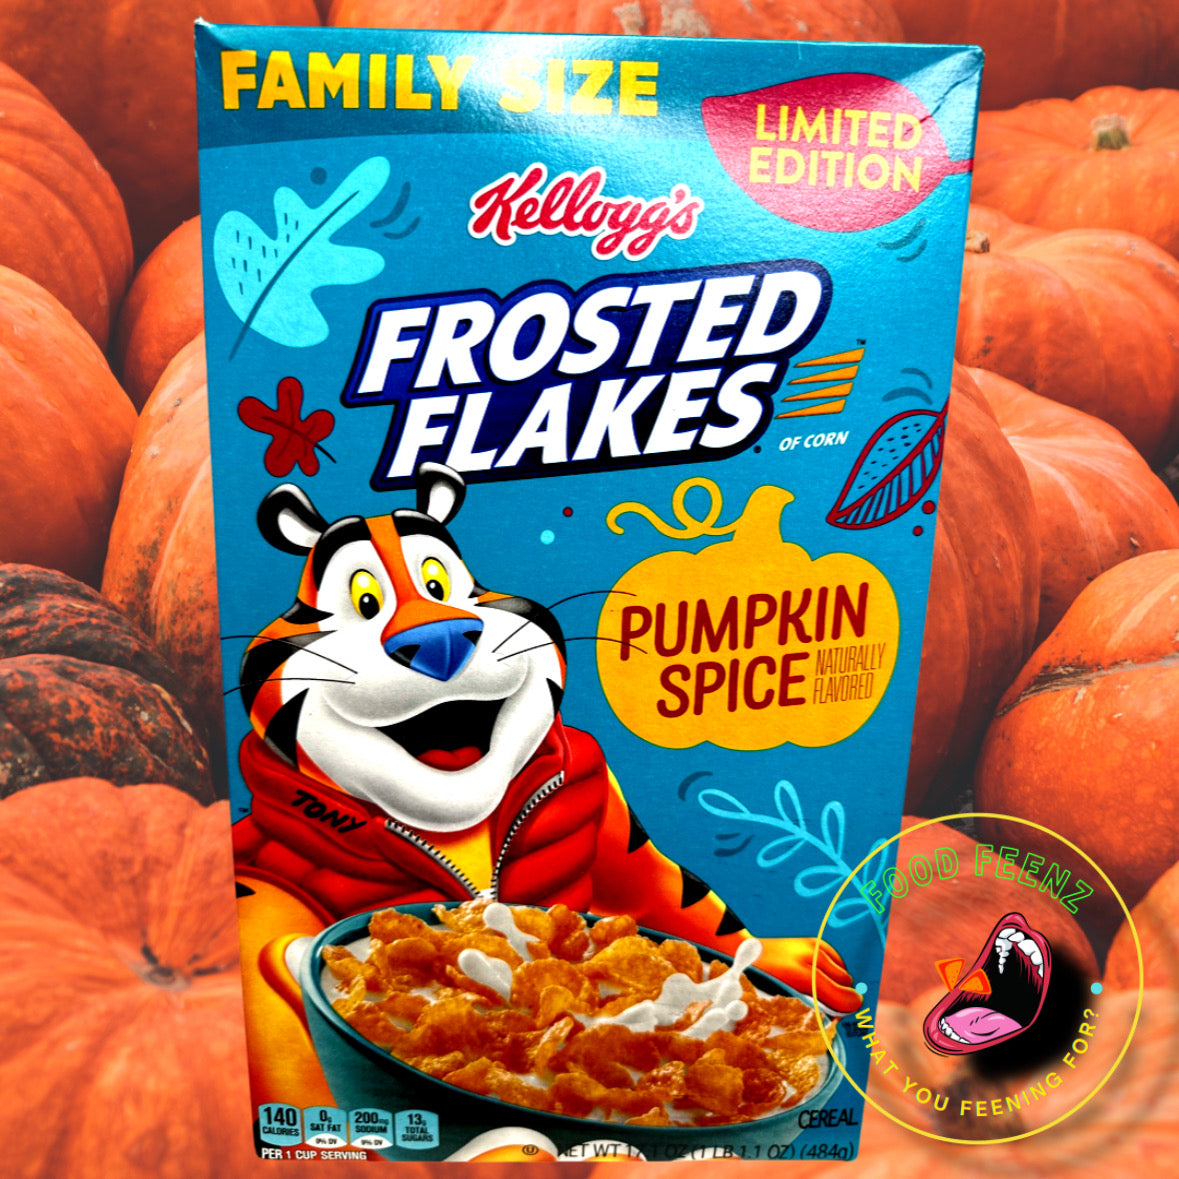 NEW Frosted Flakes Pumpkin Spice Cereal (Limited Edition) FAMILY SIZE